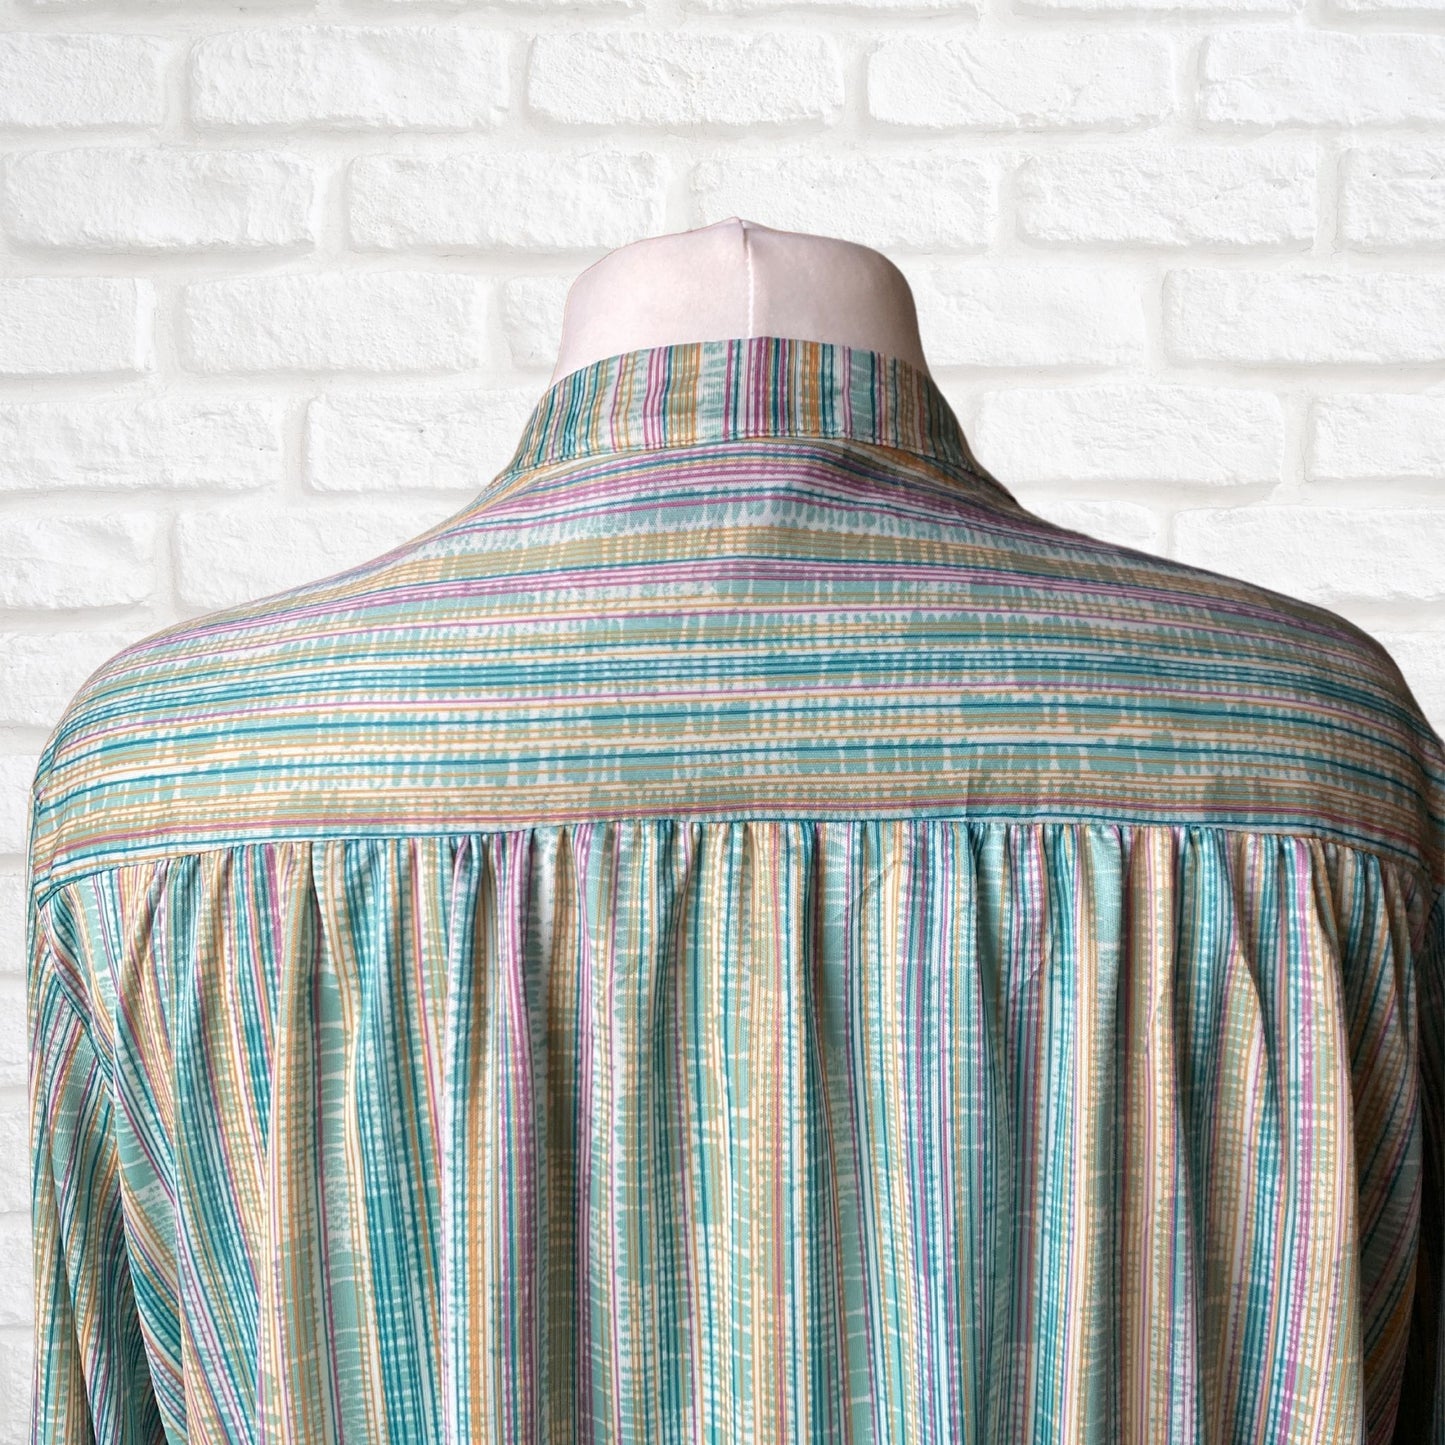 Green, White, Yellow and Pink Striped 70s Top with 3/4 Length Sleeves.  Approx UK size 20-24